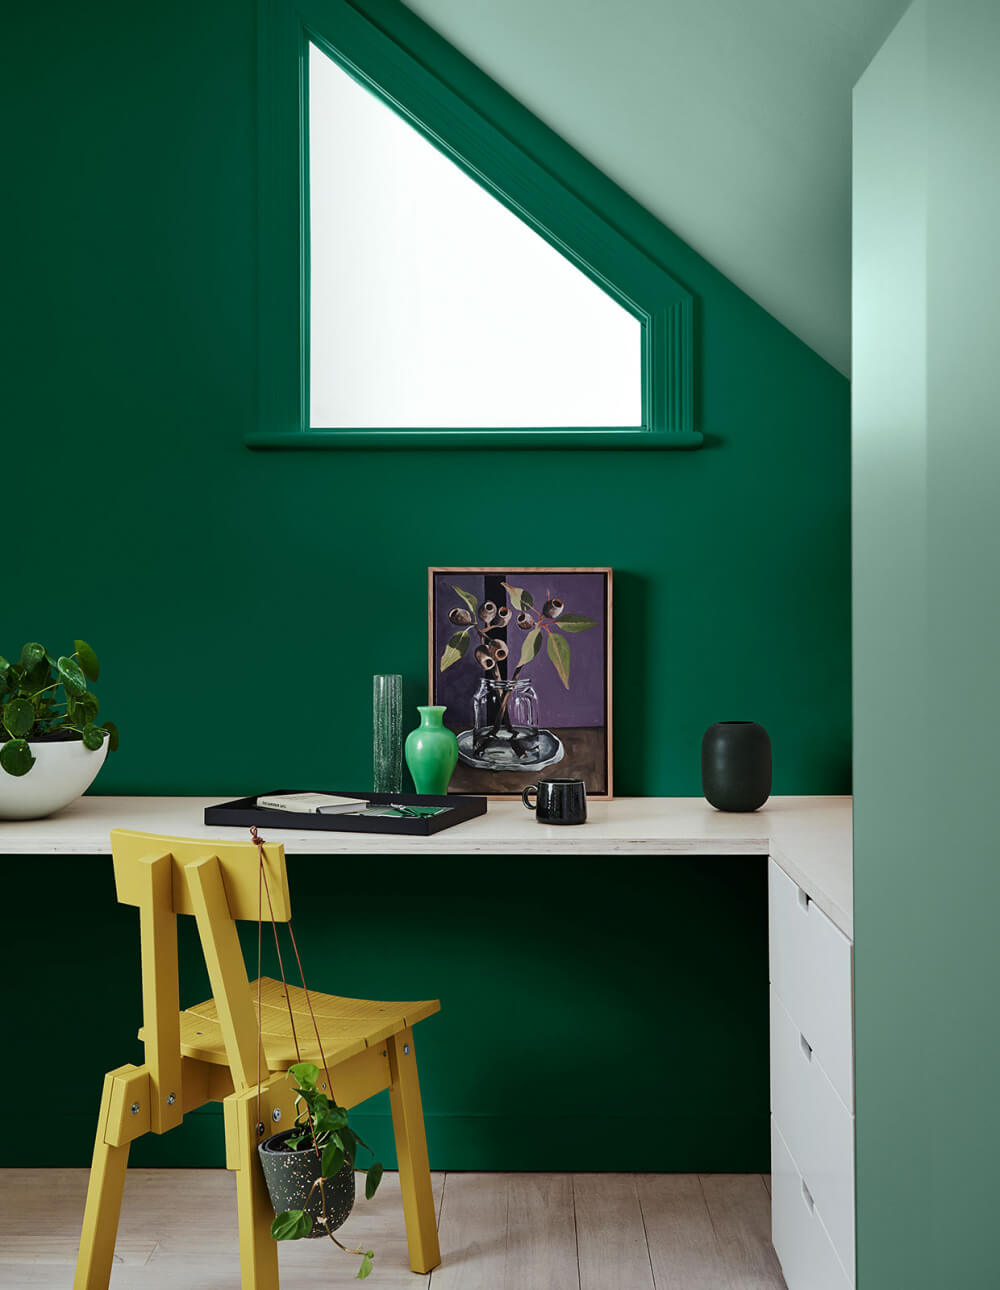 TheNordroom DuluxColorForecast2020 8 The Color Trends For 2020 Are Inspired by Nature